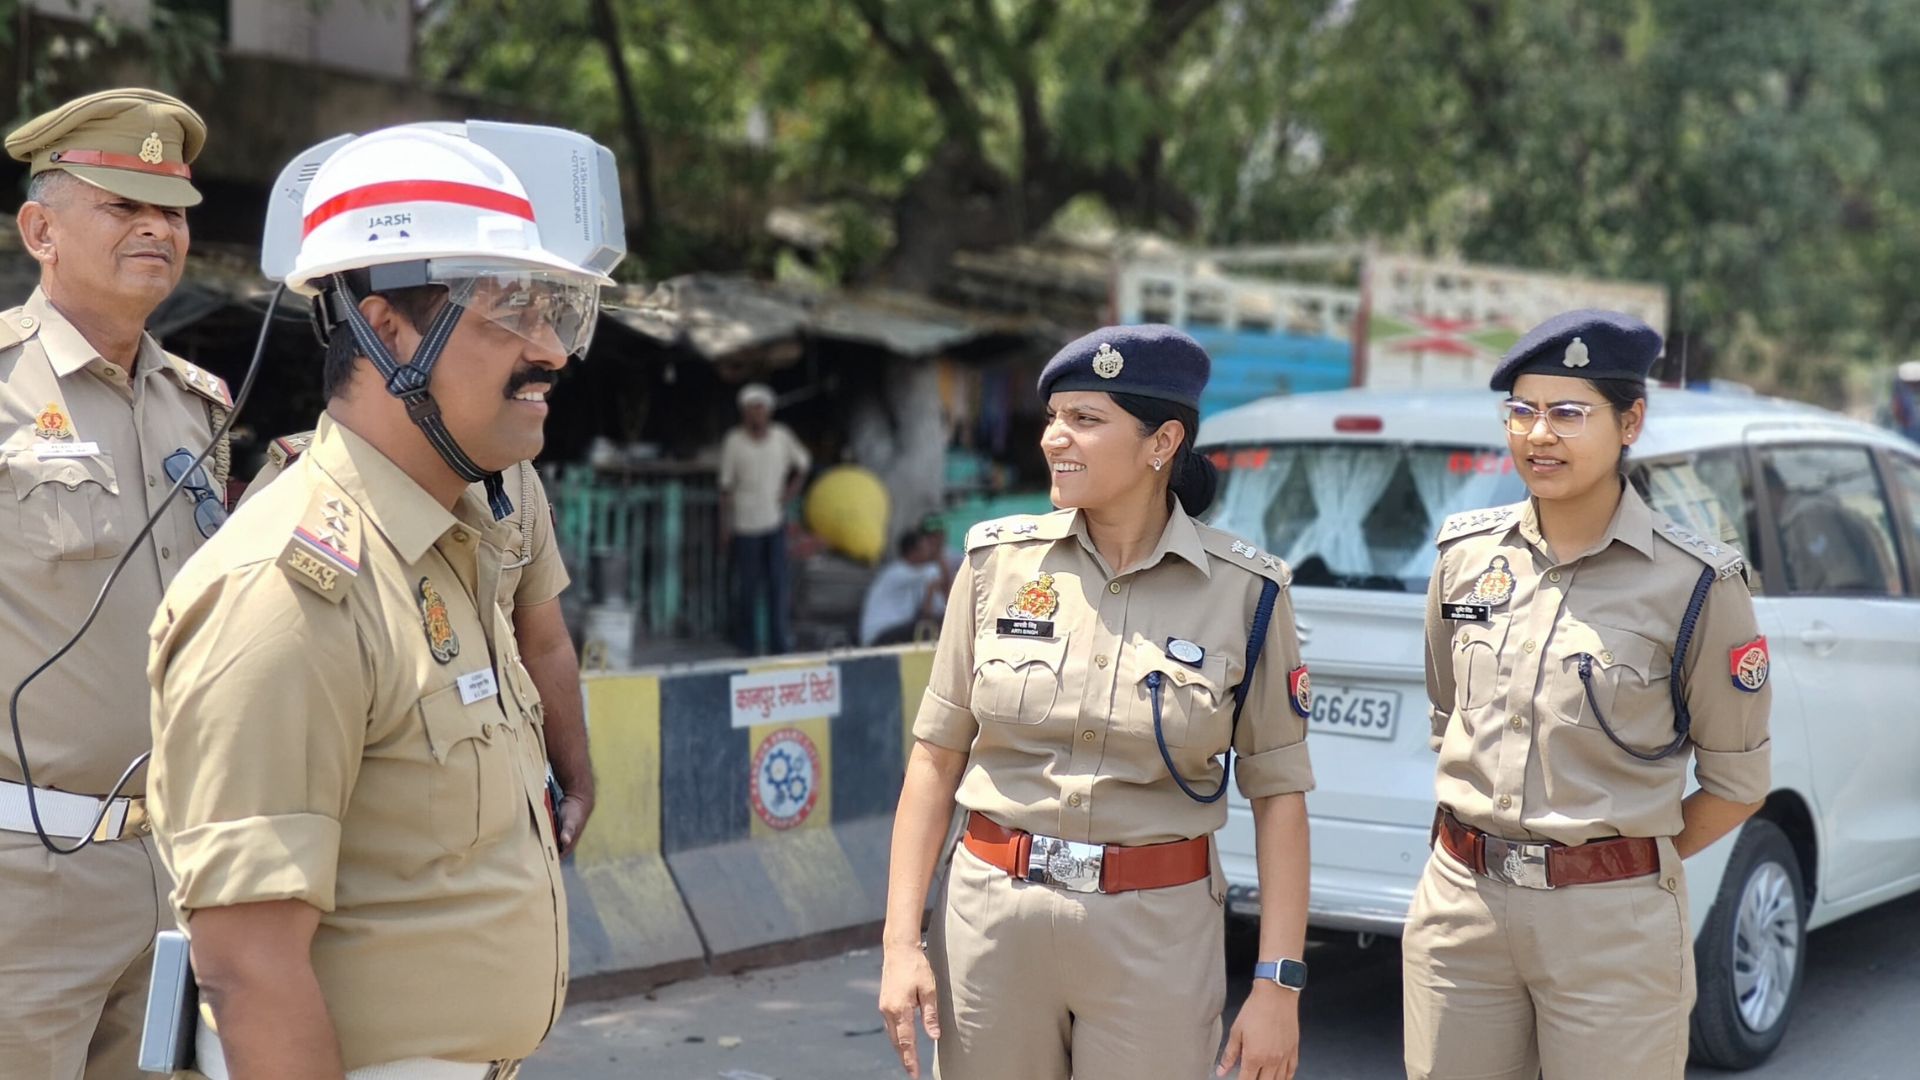 Kanpur Traffic Police soon to be equipped with special helmets to beat summer heat